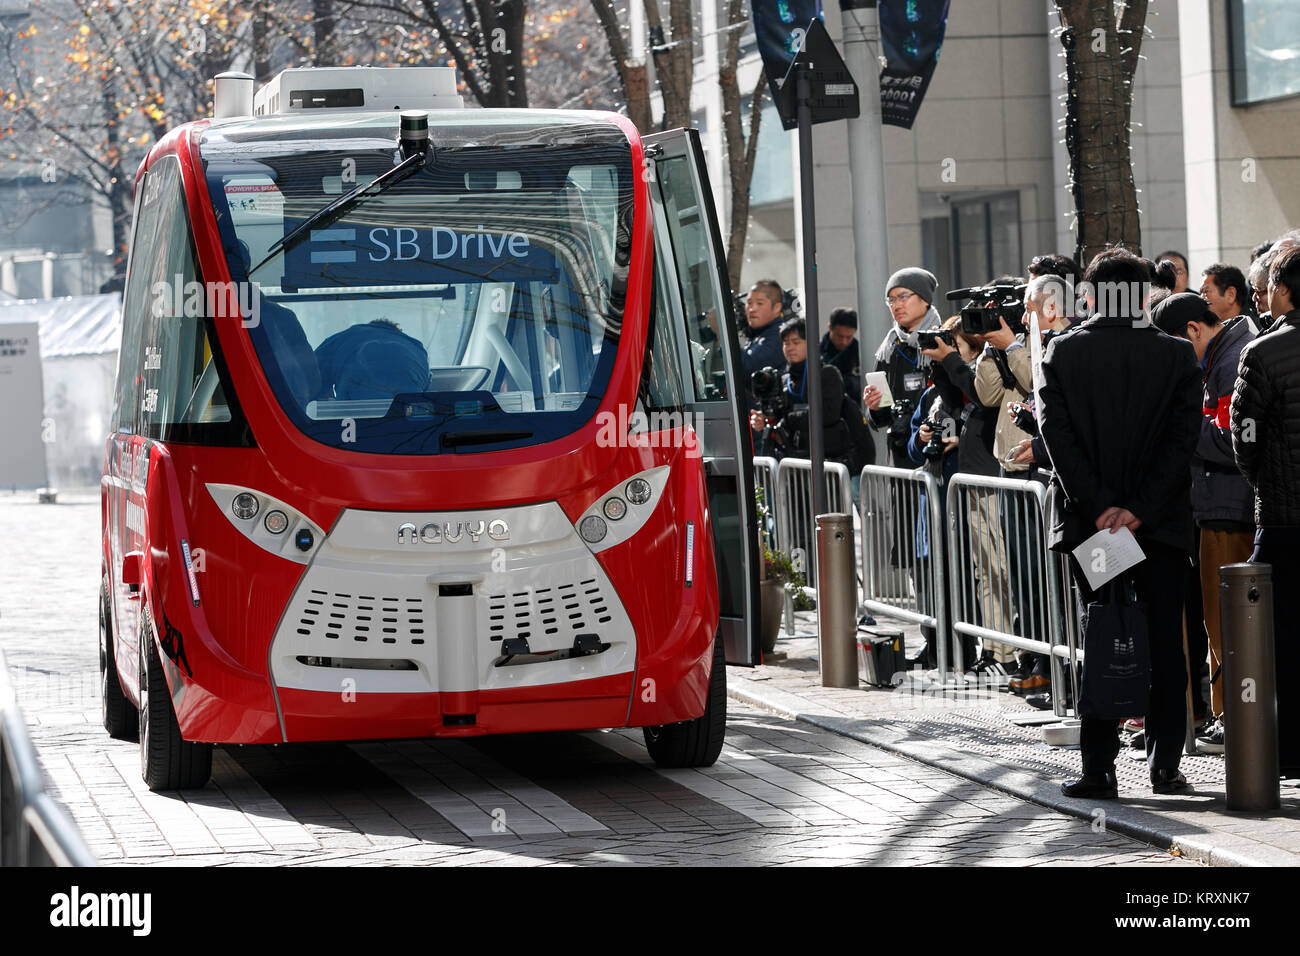 Tokyo, Japan. 22nd Dec, 2017. A self-driving electric shuttle bus Navya Arma is introduced at a press event on December 22, 2017, Tokyo, Japan. The driverless French electric vehicle (EV) developed by Navya Technologies SAS can carry up to 15 passengers and reach 45kmh. Japan's telecom giant SoftBank's subsidiary SB Drive and Mitsubishi Estate Co., Ltd. collaborated on the vehicle, and Japanese government is aiming to promote the autonomous driving technology ahead of the Tokyo 2020 Olympics. Credit: Rodrigo Reyes Marin/AFLO/Alamy Live News Stock Photo